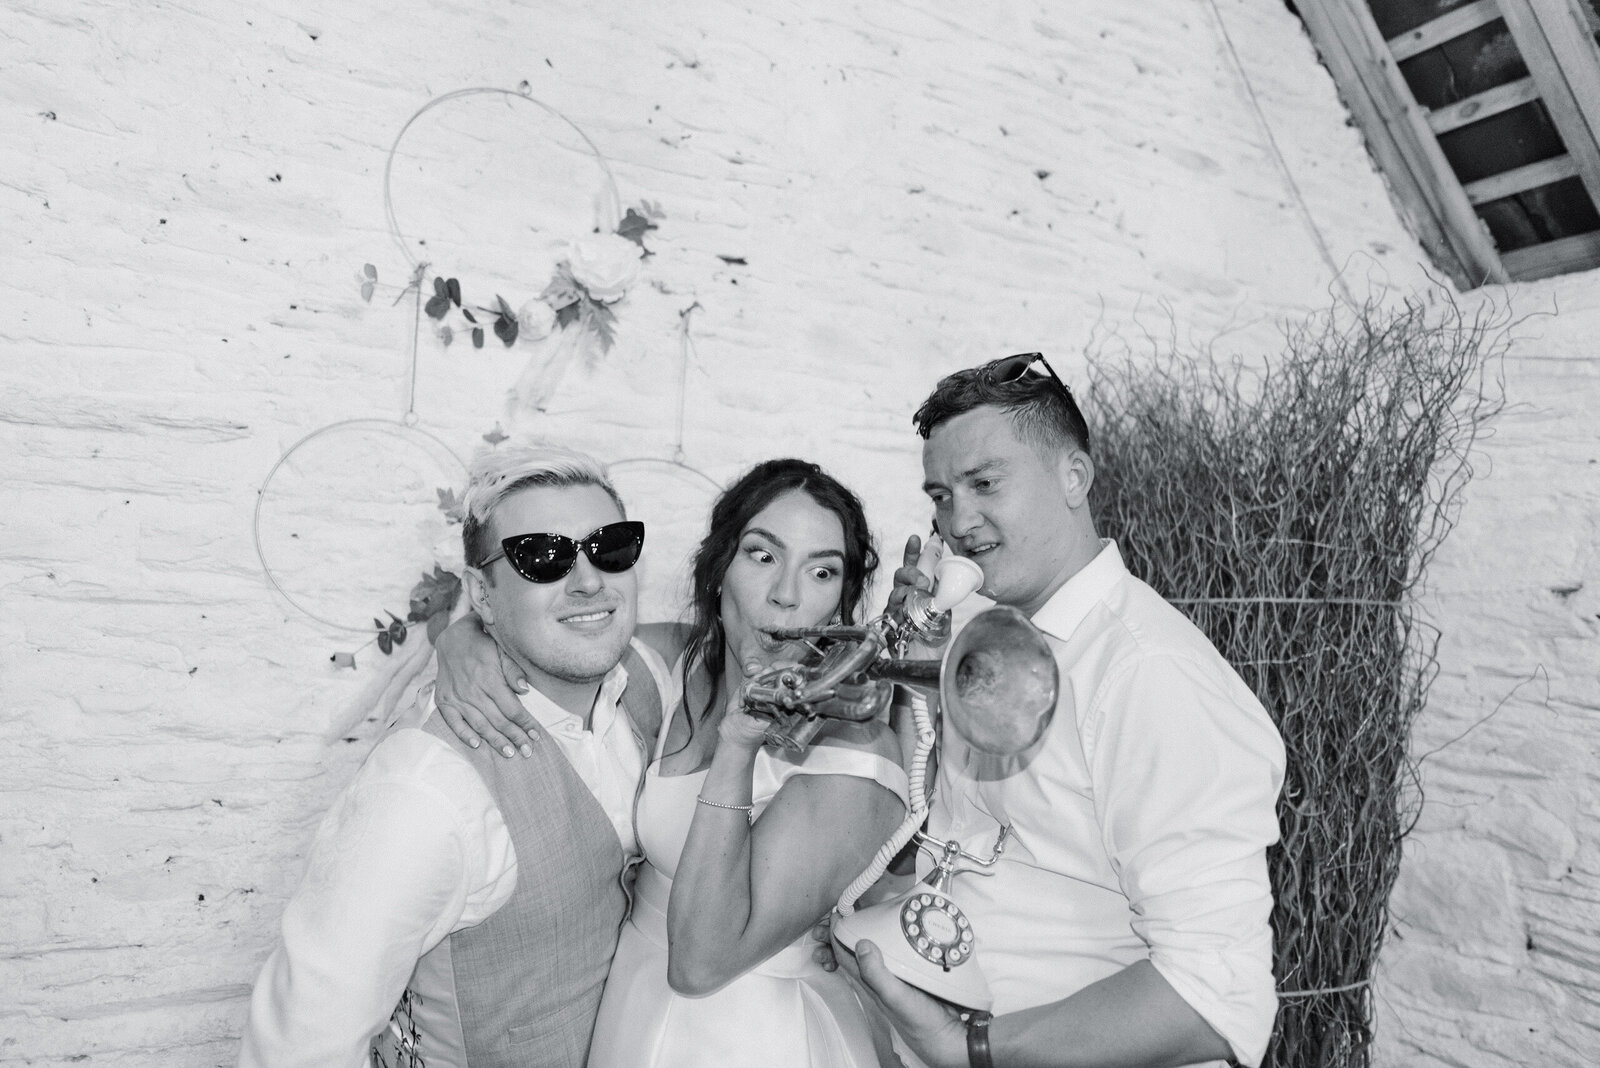 wedding photo booth hire Devon Plymouth Exeter Liberty Pearl Photography20